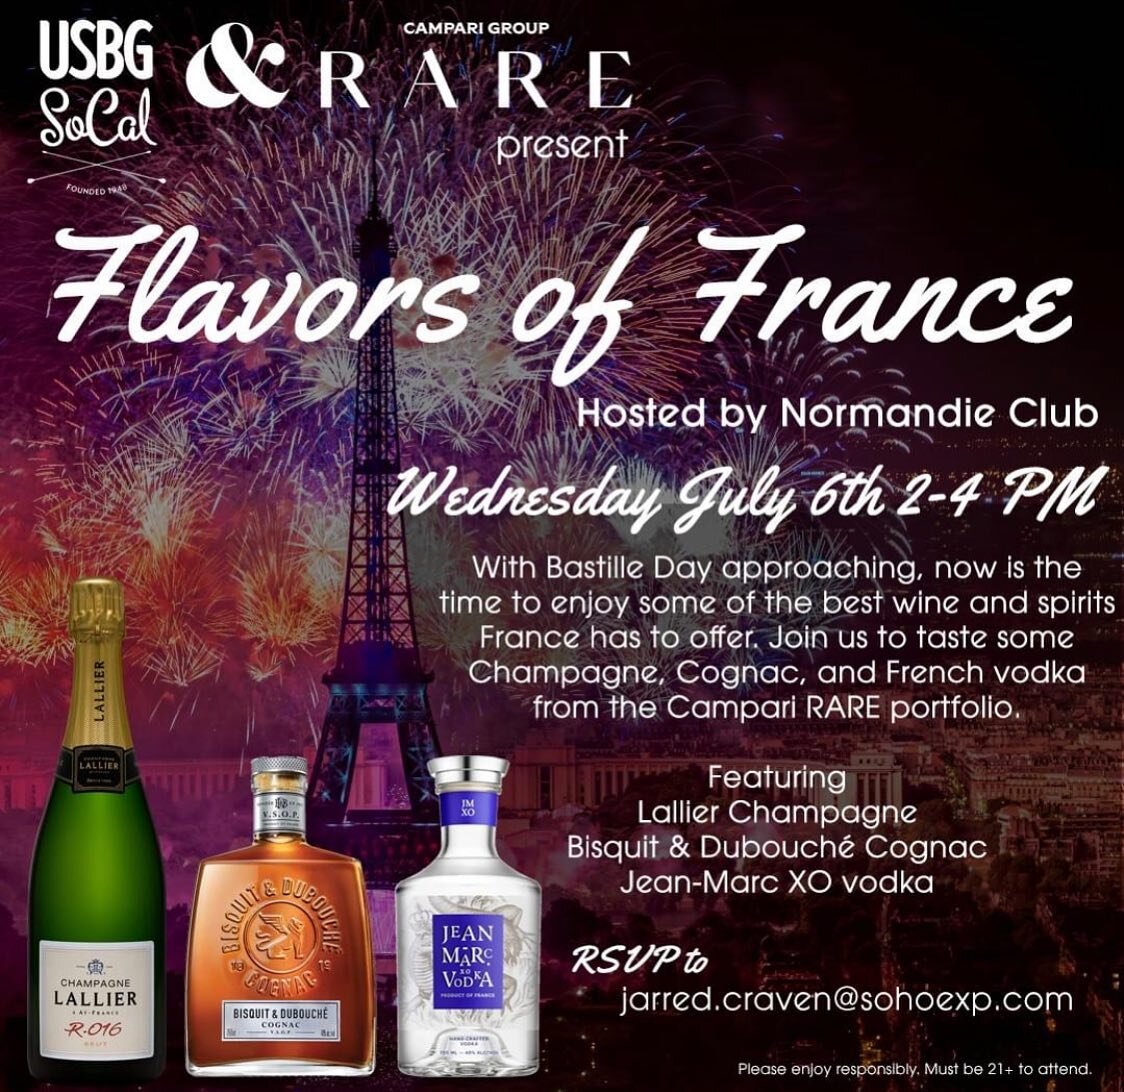 Come on out to Normandie Club on 7/6 to have a bit of the fine French flavors from Campari RARE!

RSVP - jarred.craven@sohoexp.com